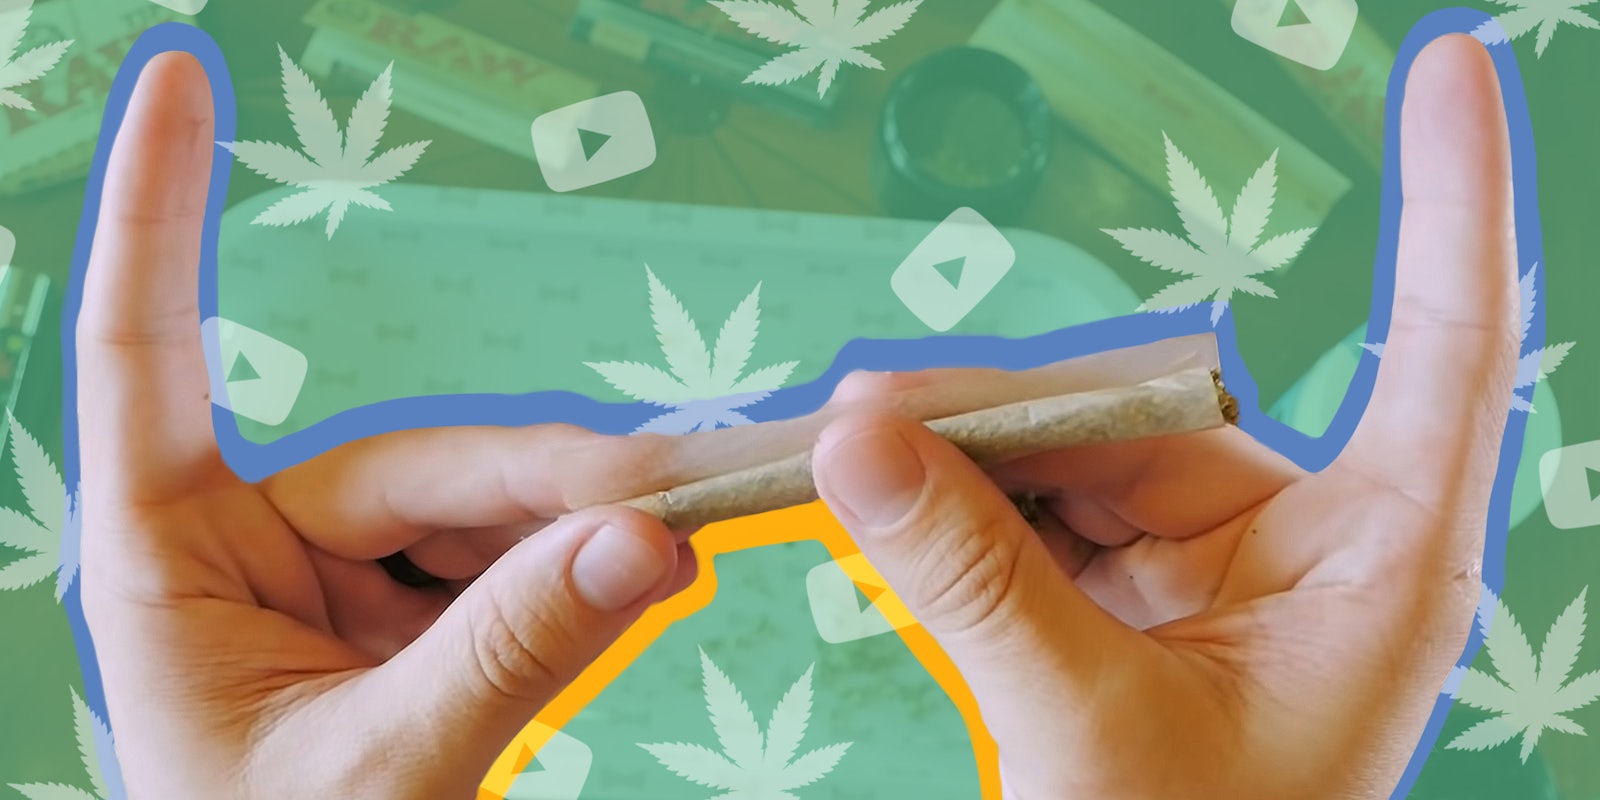 hands rolling joint with pot leaf and YouTube logo background with green overlay Passionfruit Remix